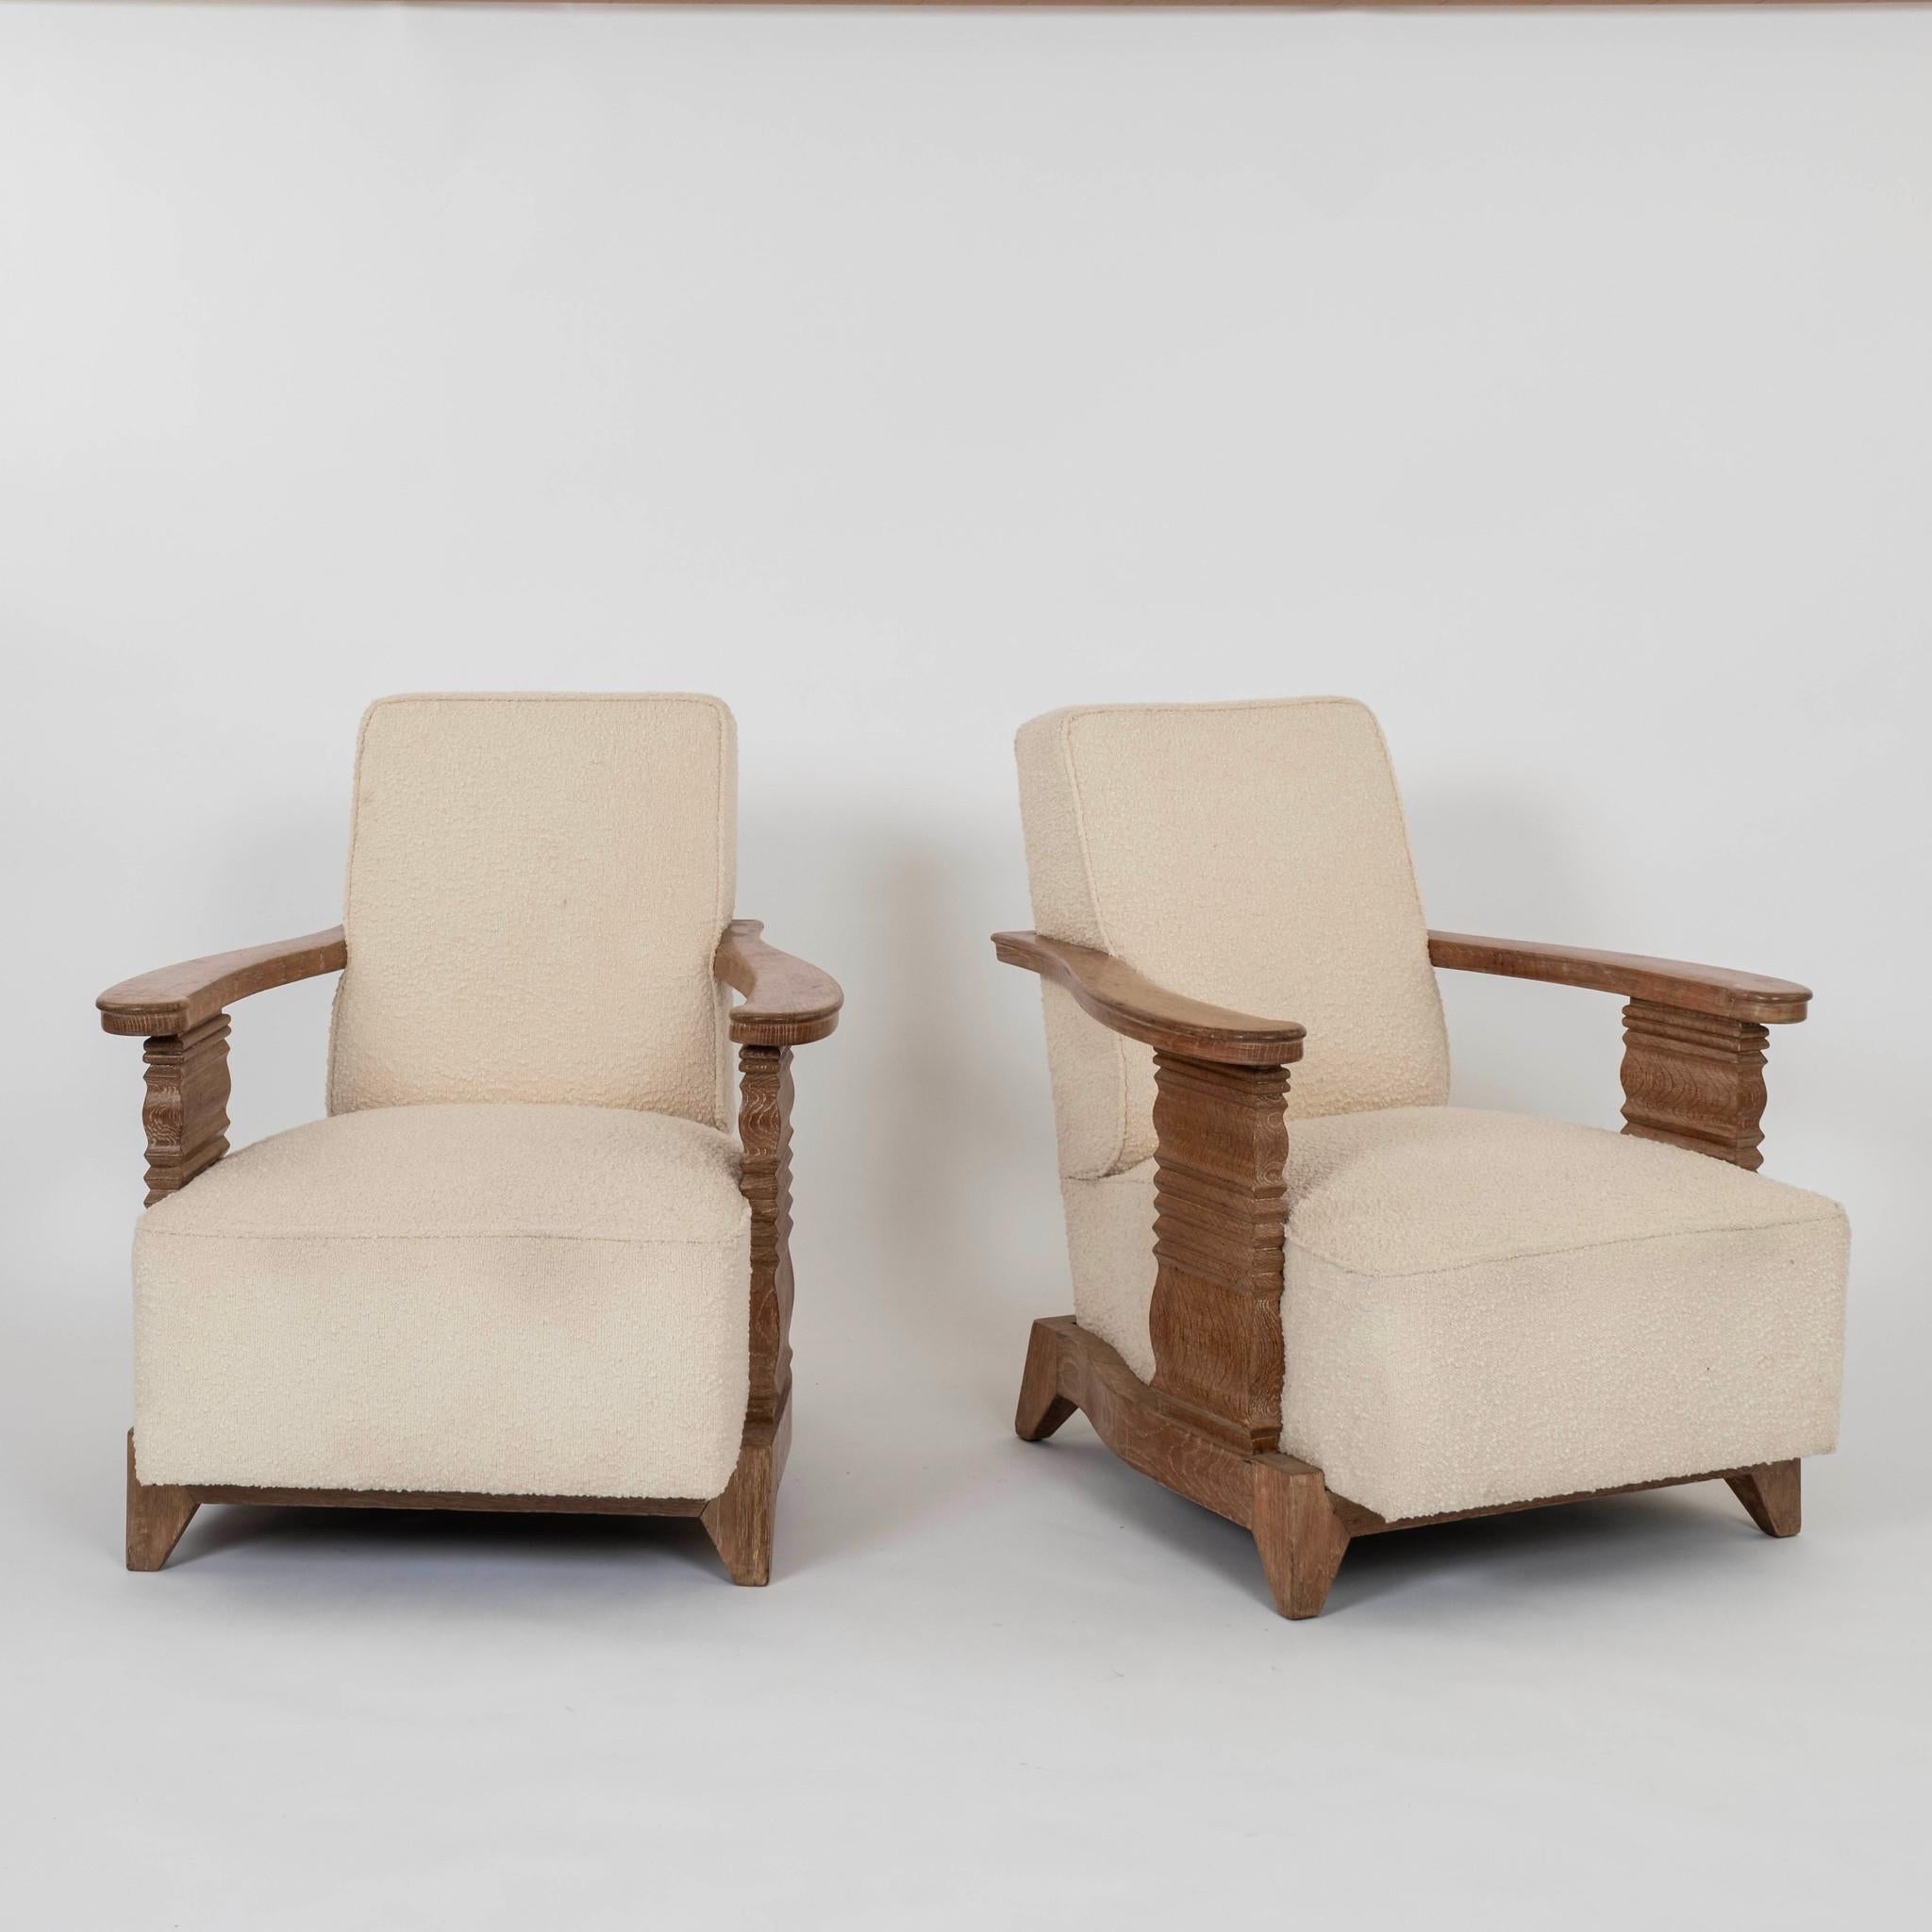 Pair of French Art Deco cereused white oak chairs with reticulated arms and knubby boucle.